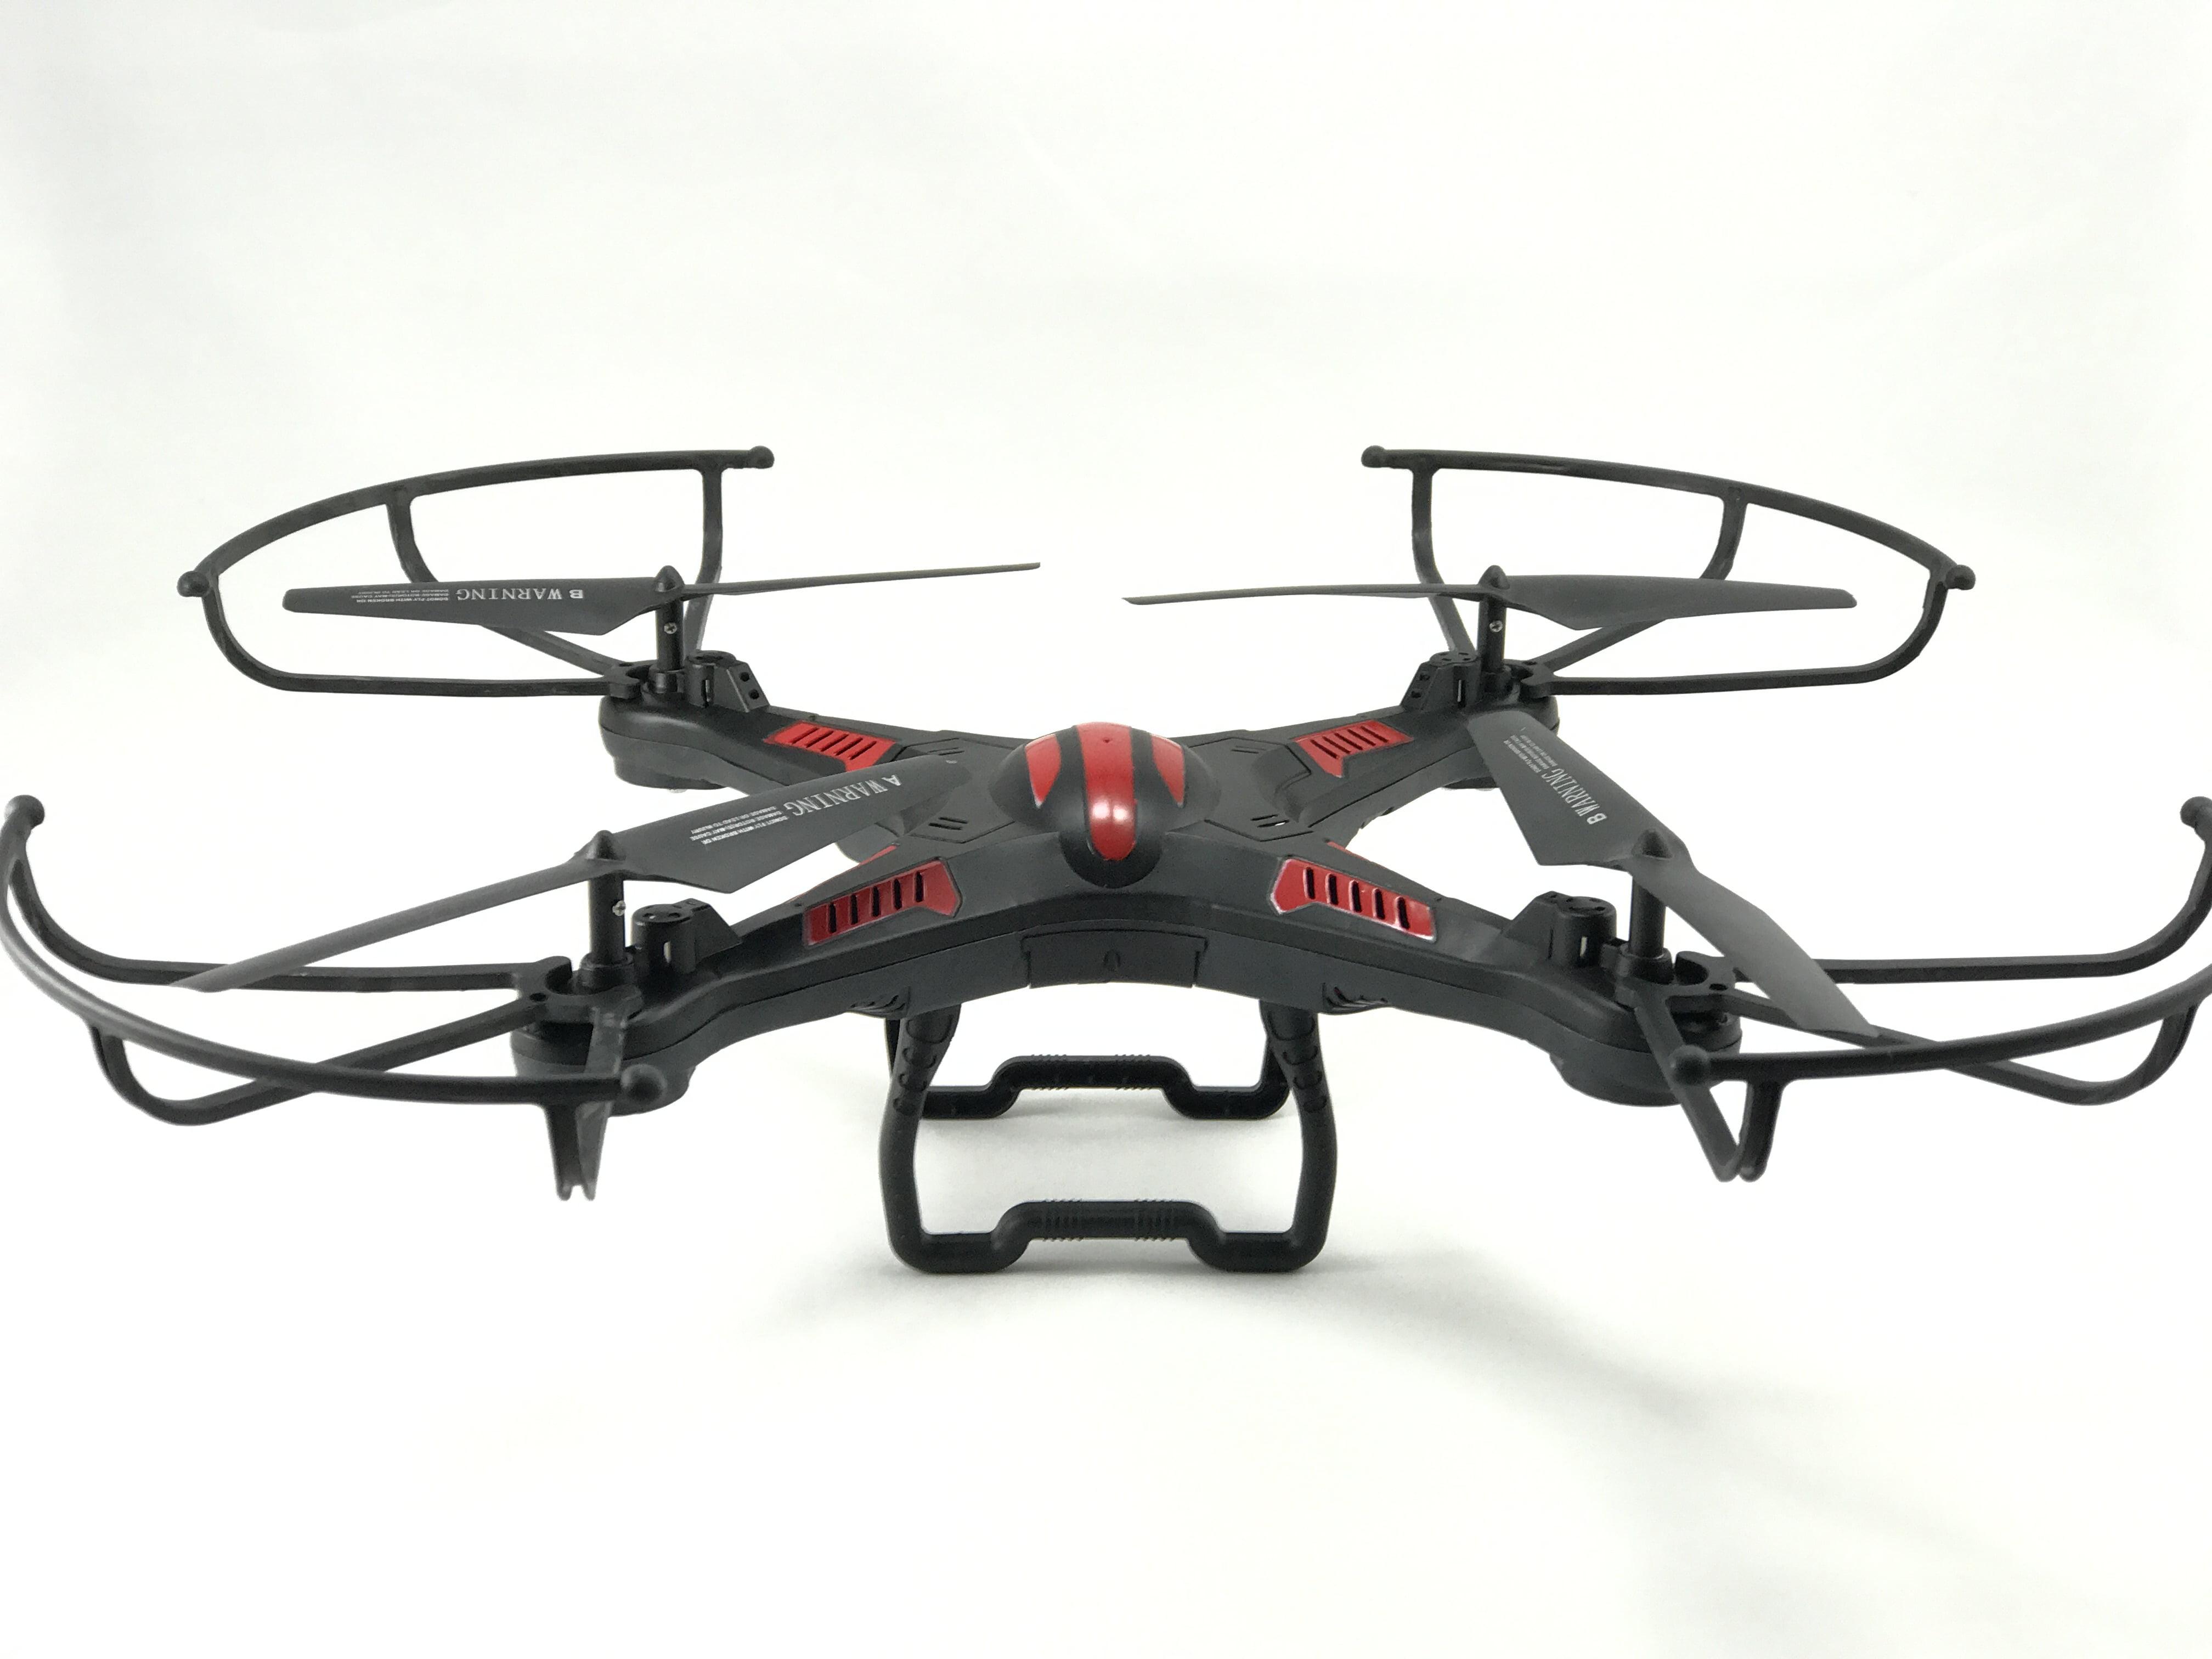 Kingco Quadcopter Vision Drone: Unparalleled Aerial Photography Made Easy with Kingco Quadcopter Vision Drone